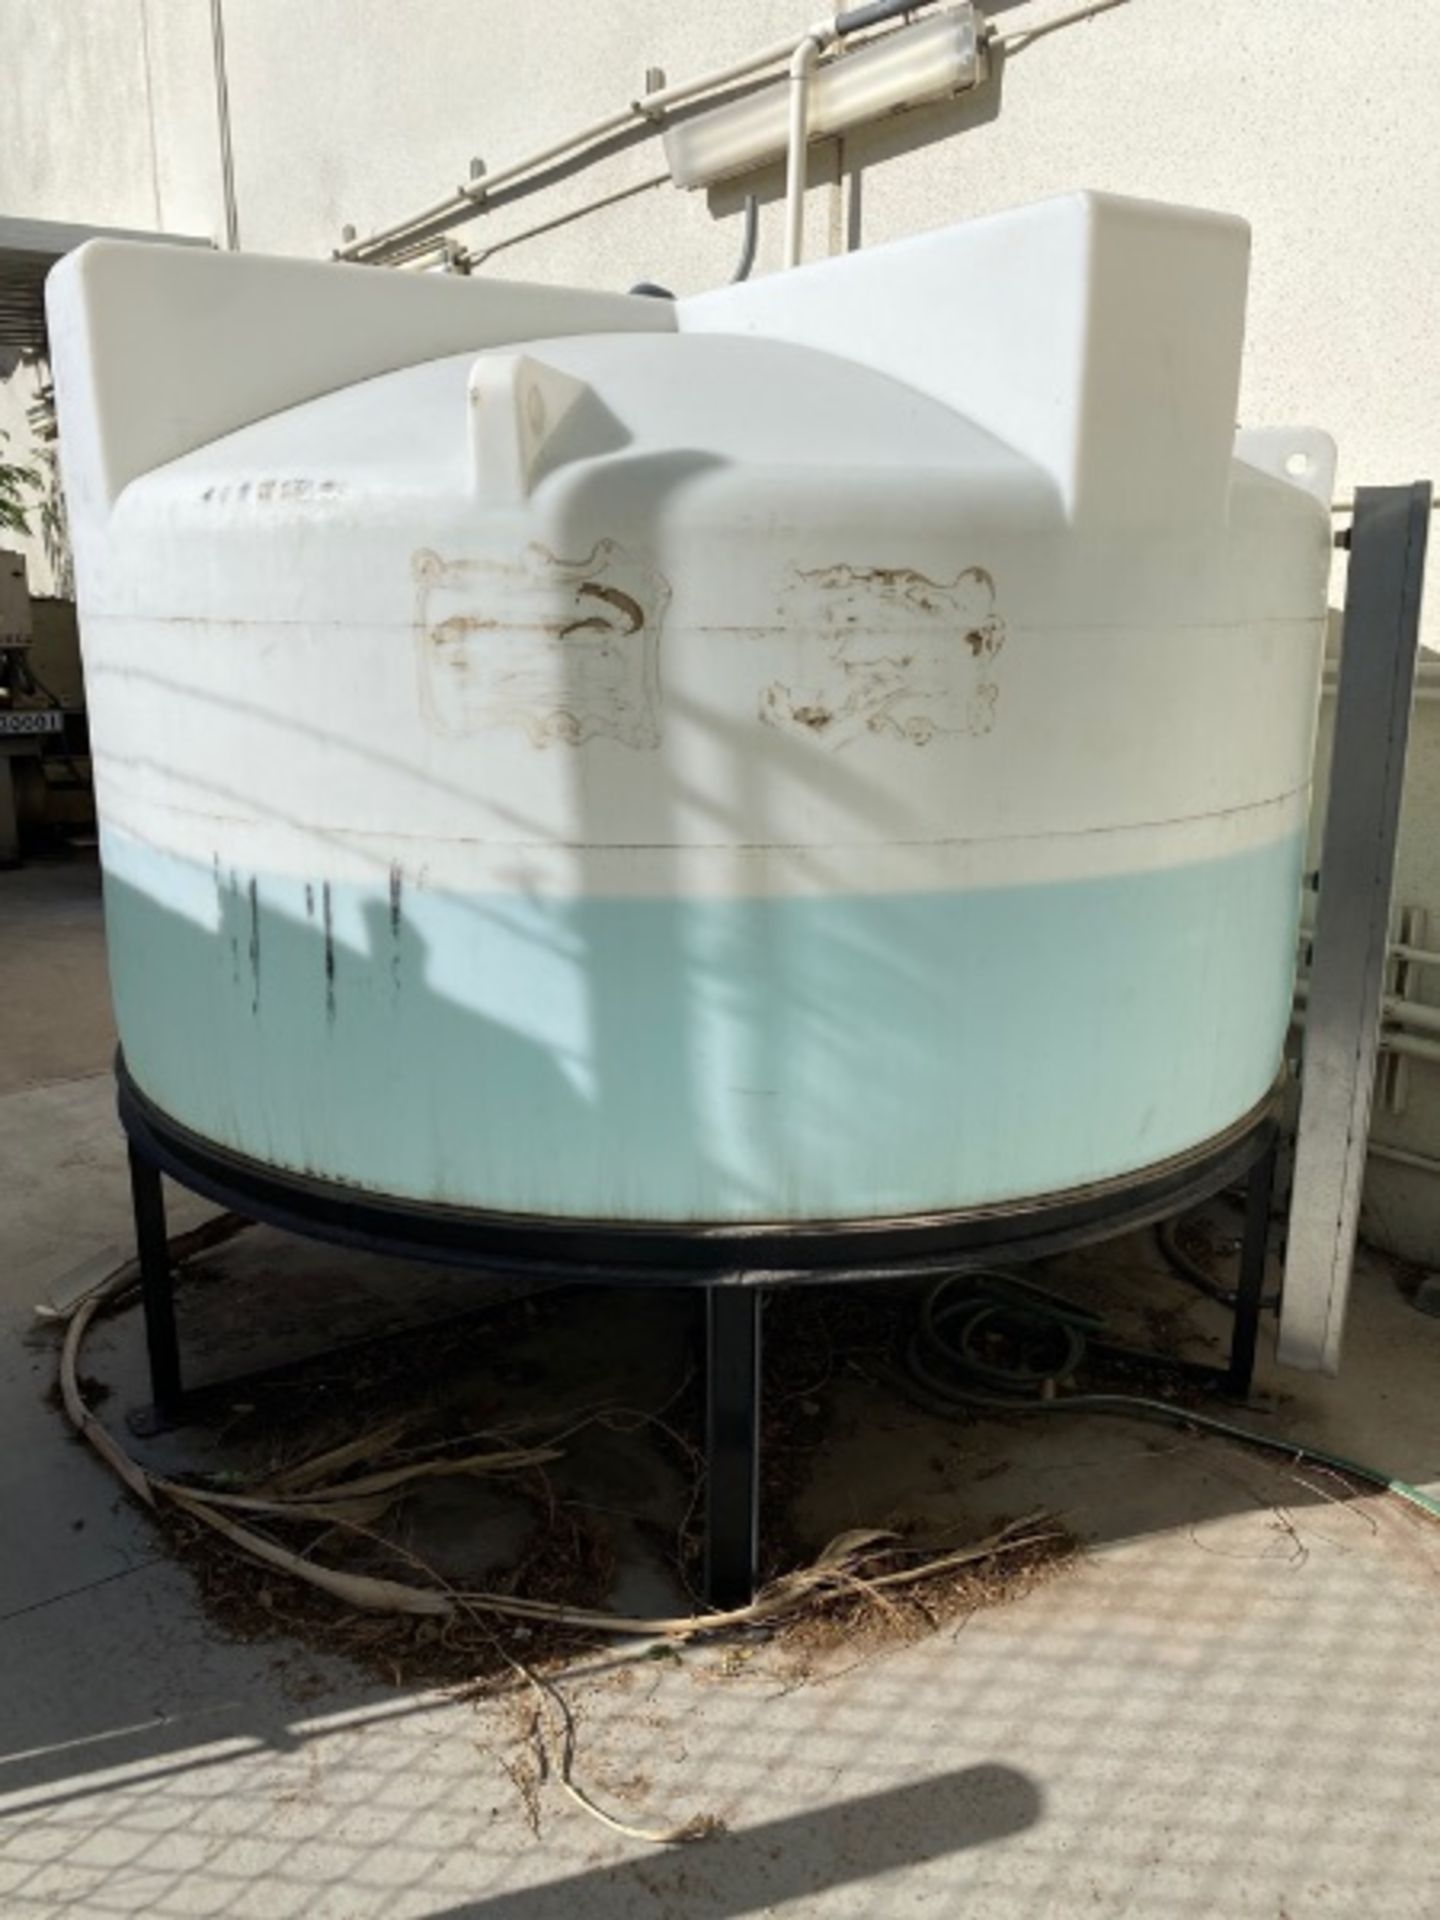 500 Gallon Ace Roto-Mold Water Tank - Image 2 of 2